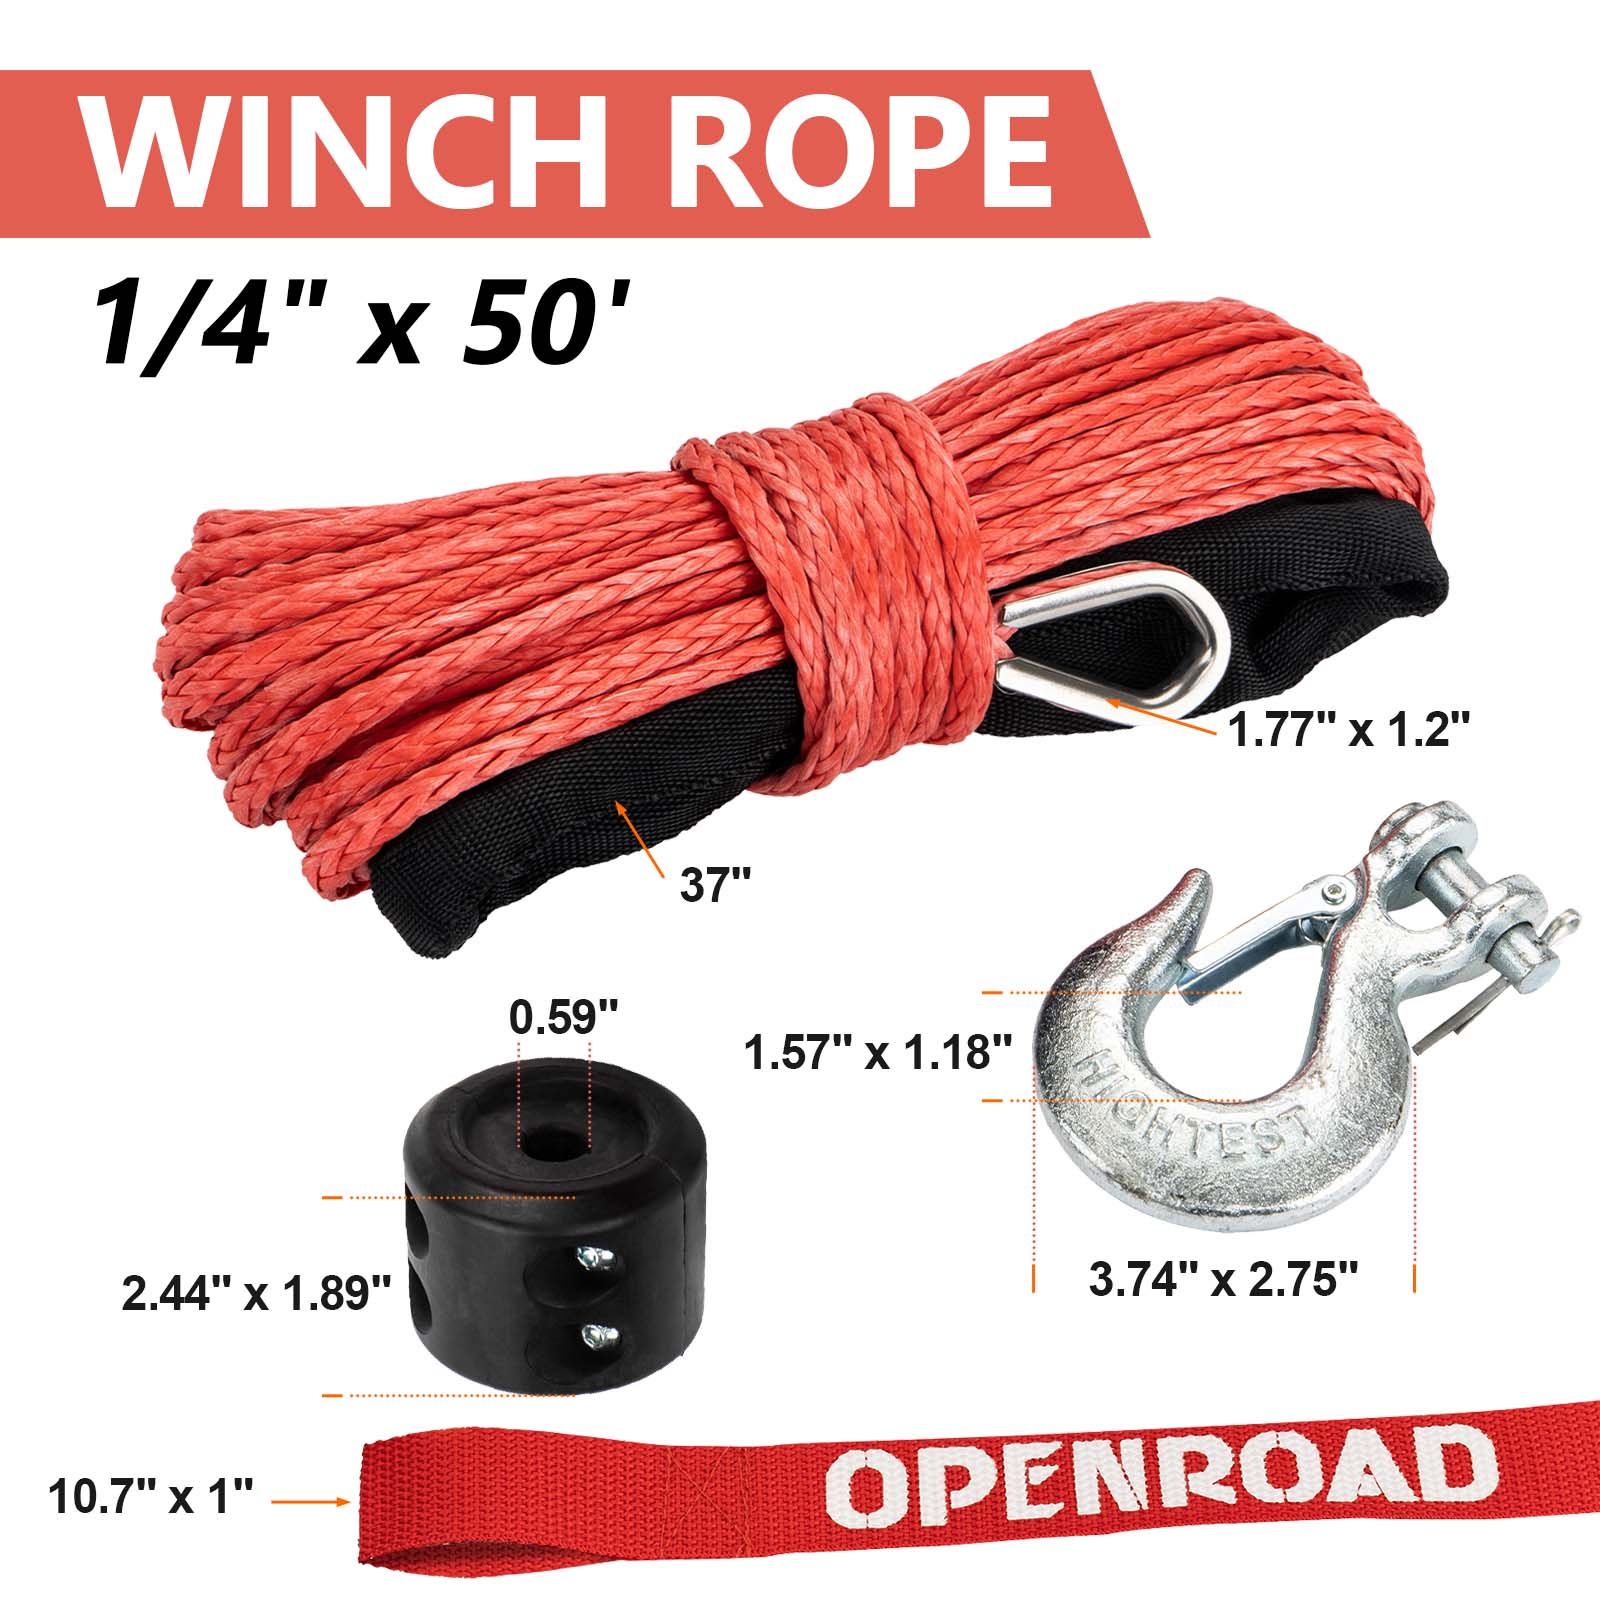 OPENROAD Synthetic Winch Rope 1/4" x 50'Winch Rope Extension with Black Removable Hook and ATV New Adjustable Rubber Blocks  openroad4wd.com   